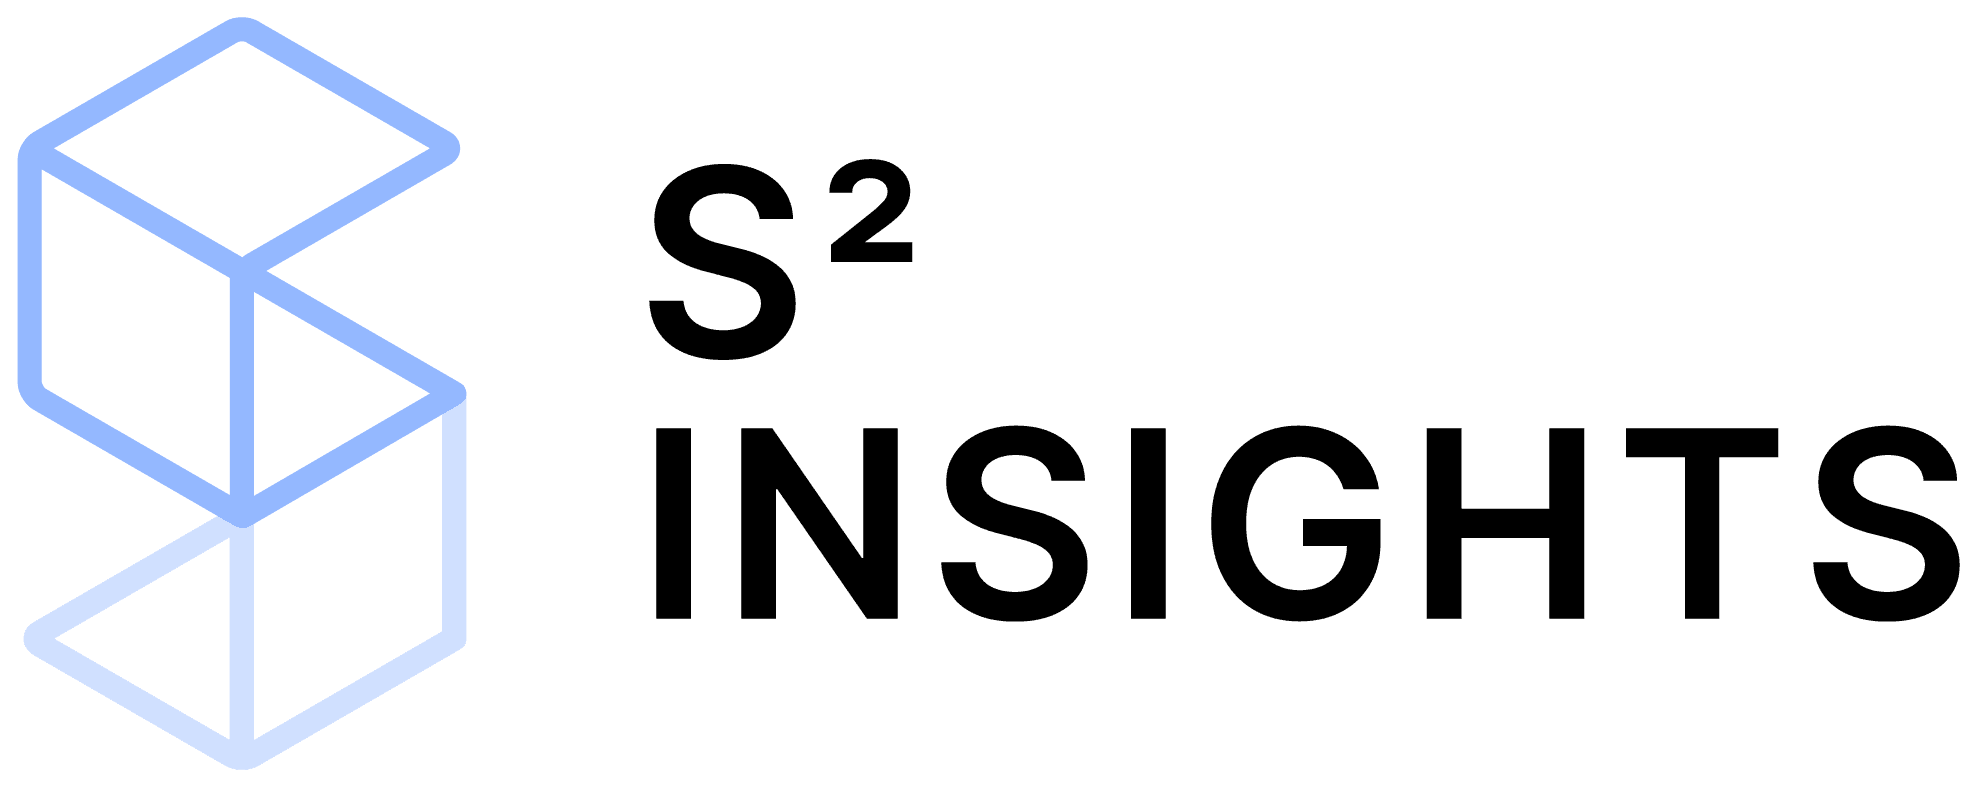 S Squared Insights logo